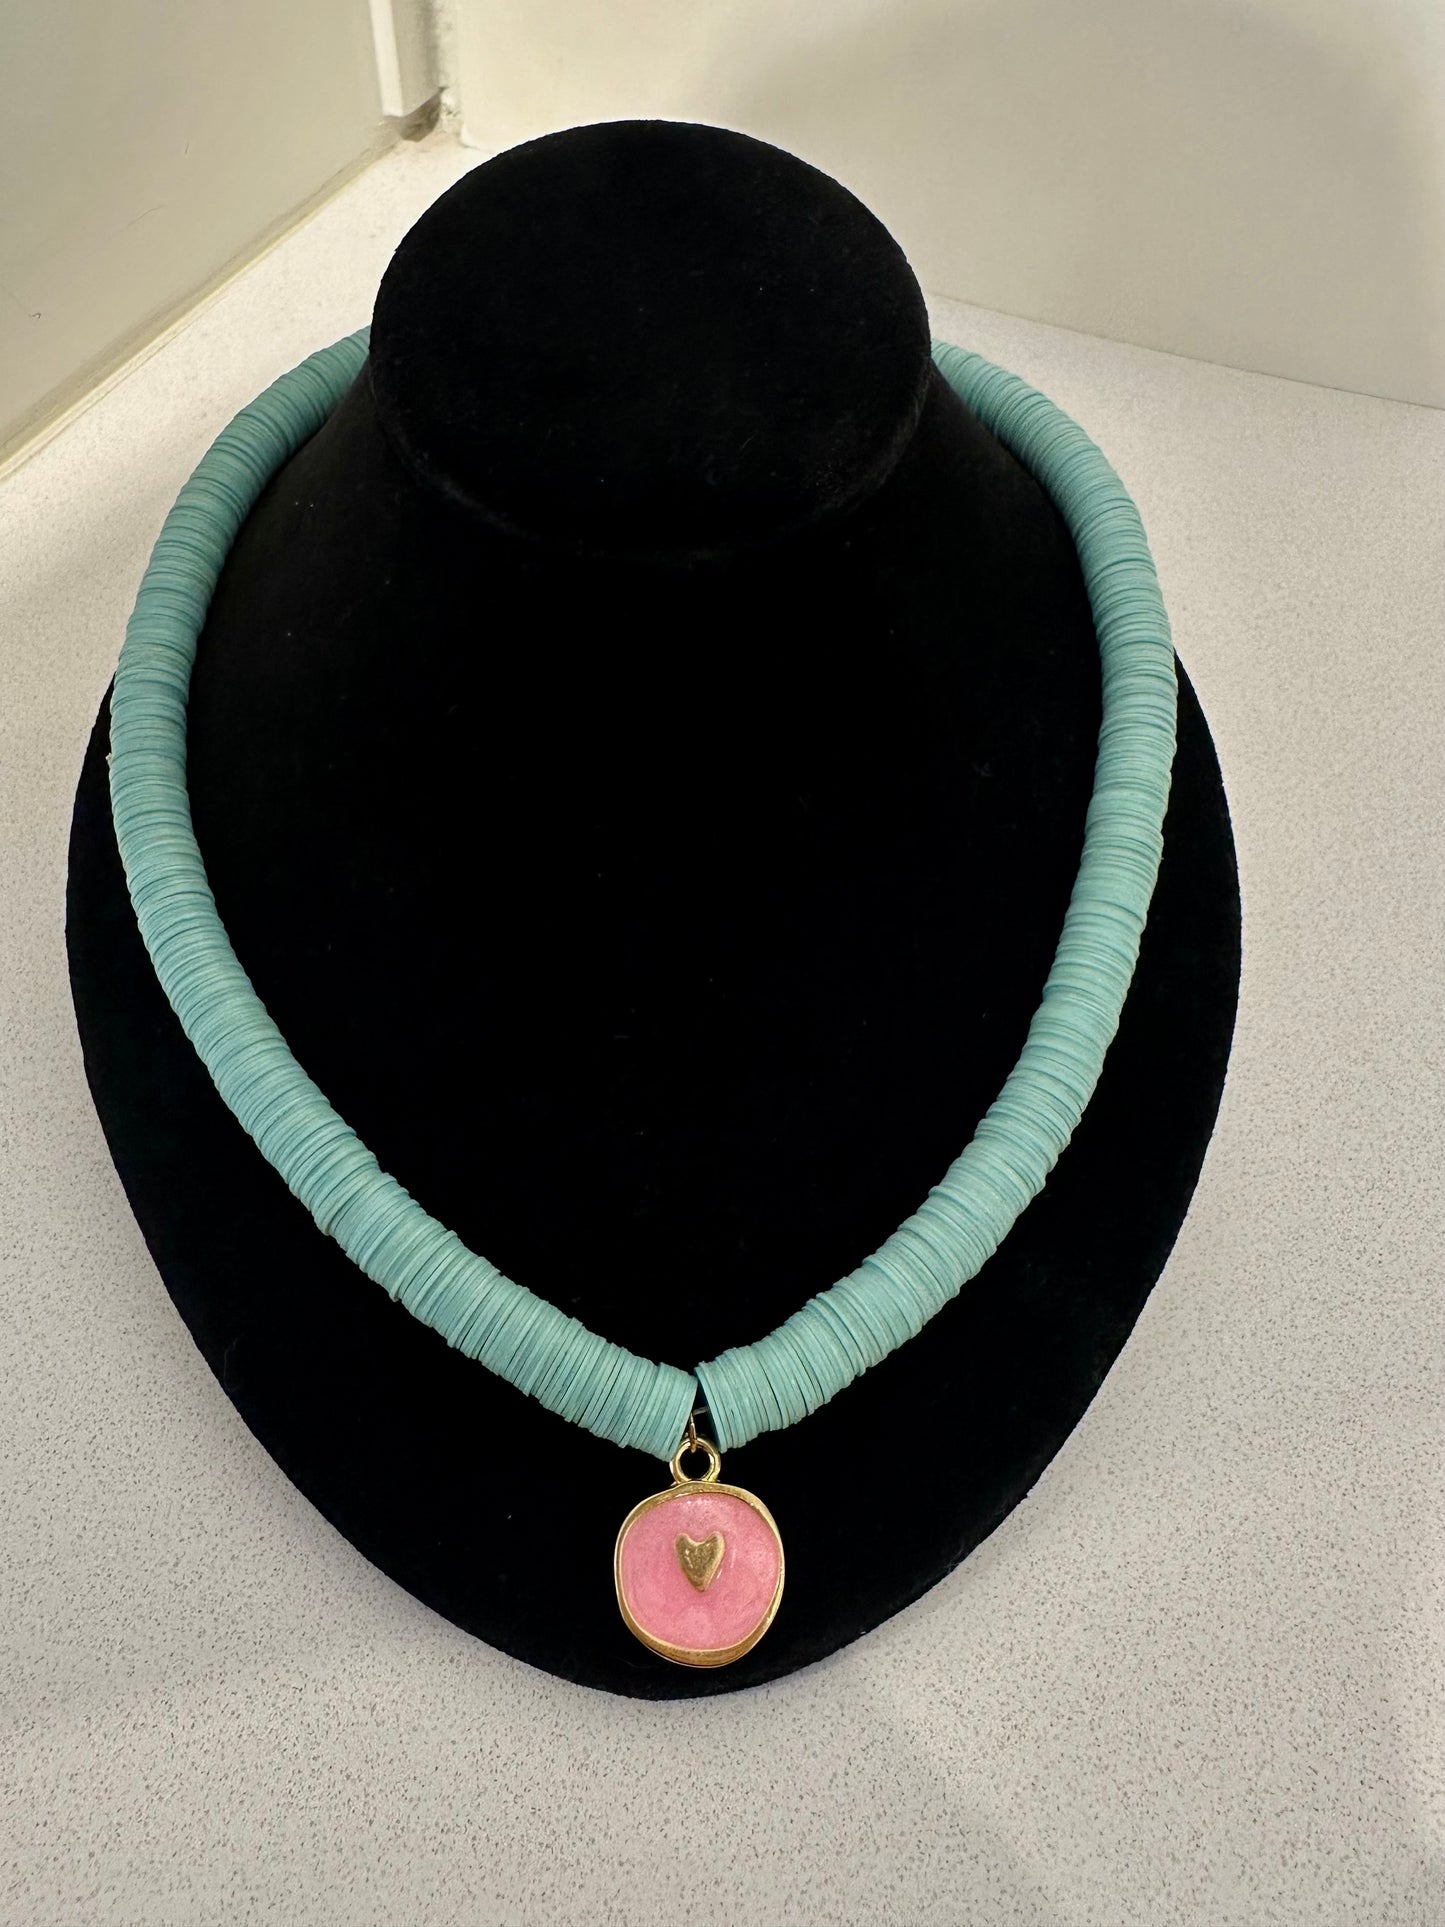 Turquoise Necklace With Pink Heart Charm